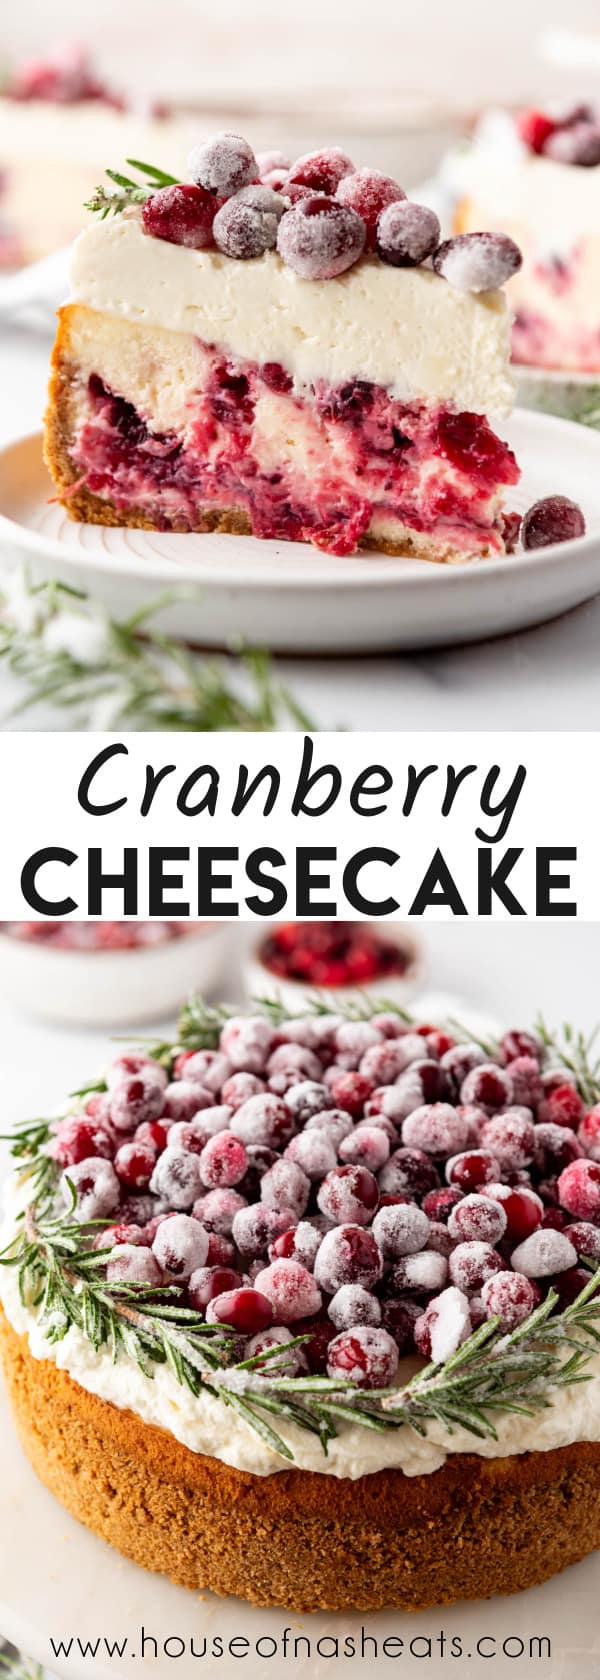 A collage of images of cranberry cheesecake with text overlay.